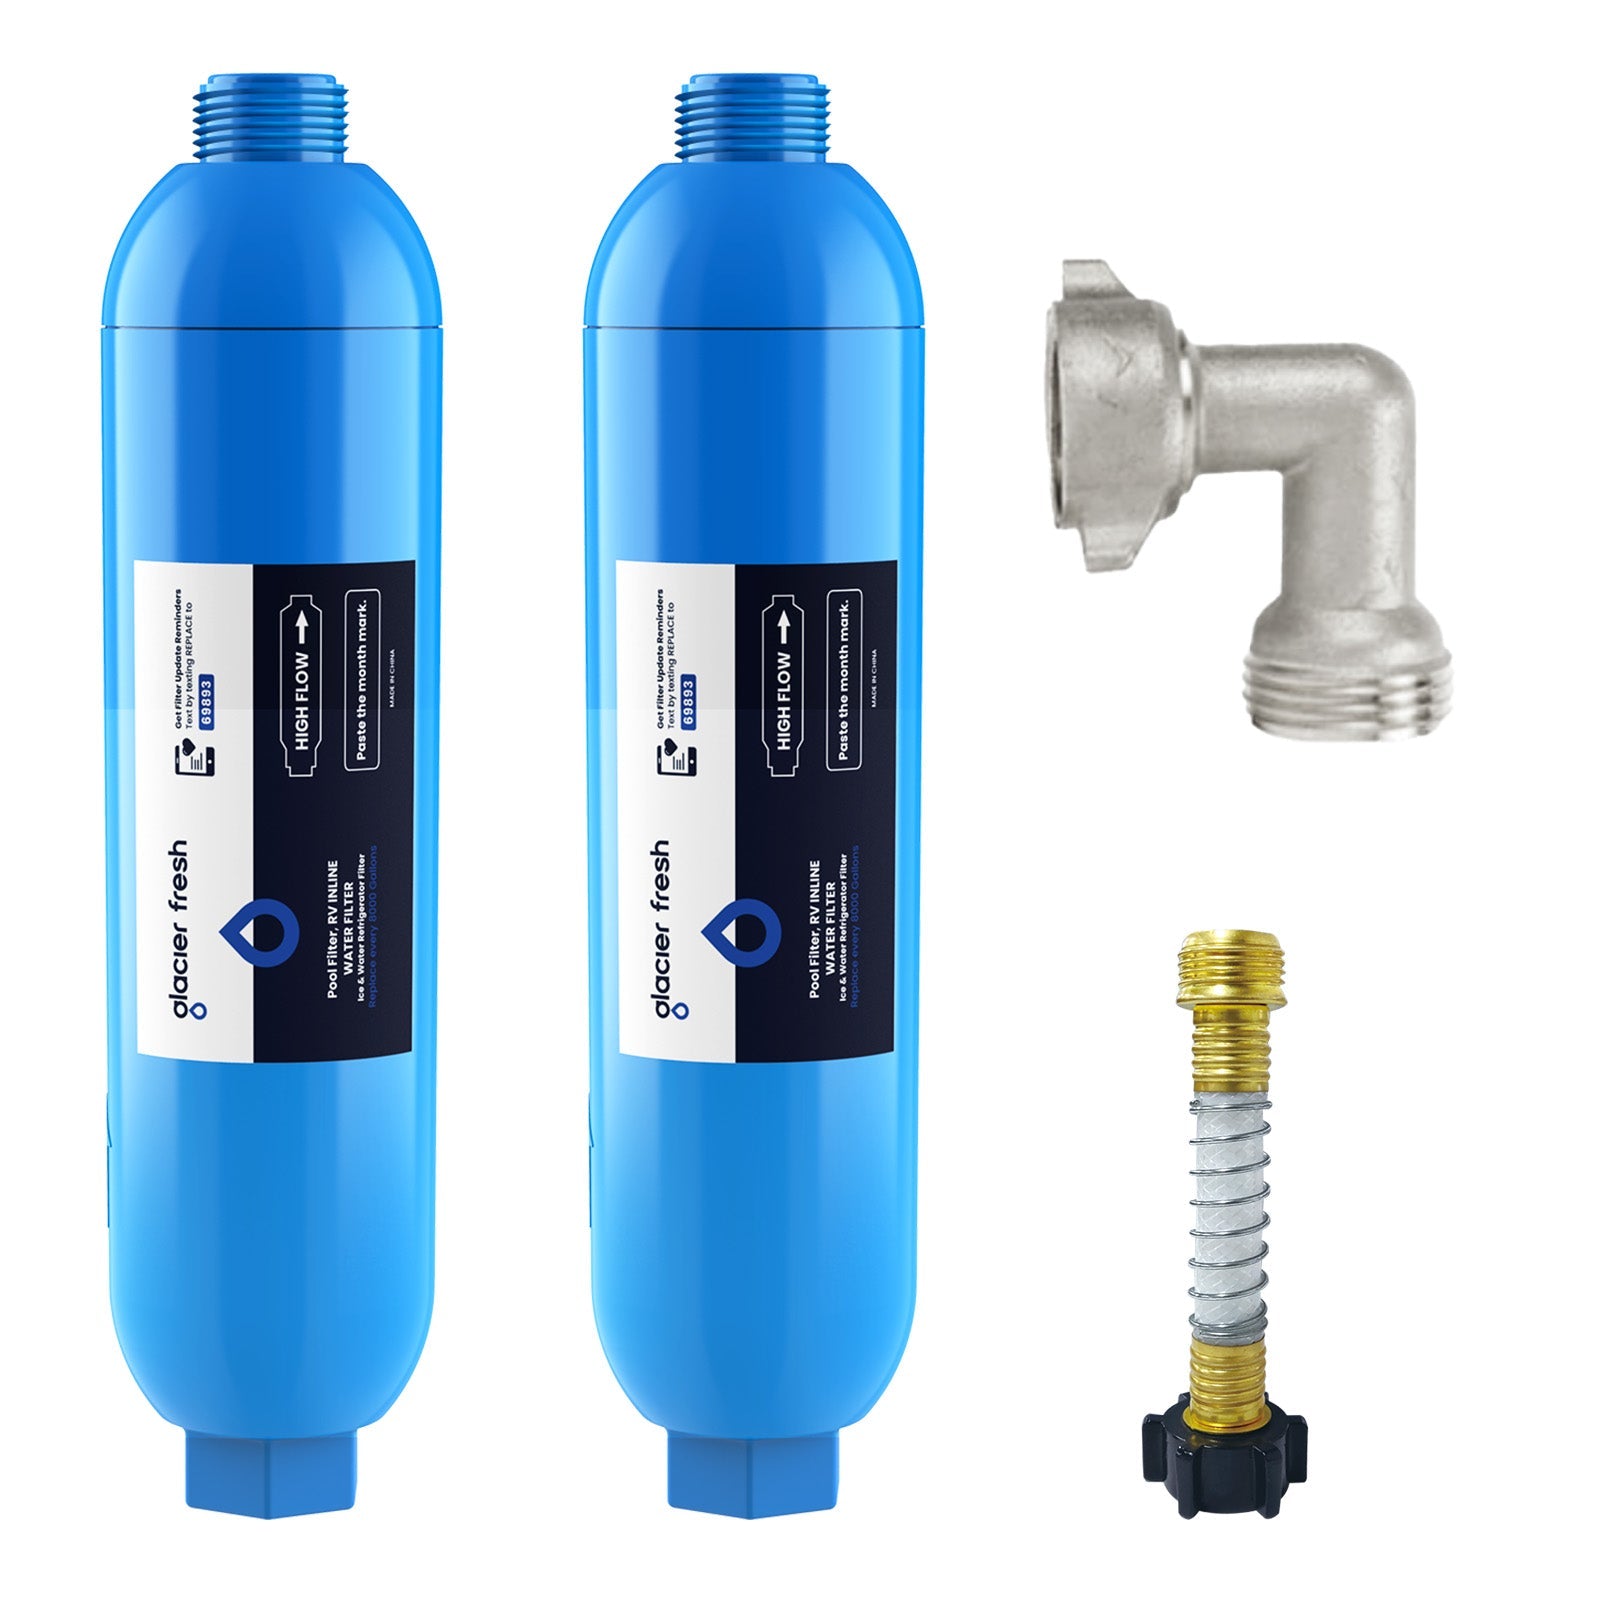 Belvita RV inline water filter with Flexible Hose Protector,Dedicated for  RVs and Marines,2 pack - A&H DIRECT RV RENTALS